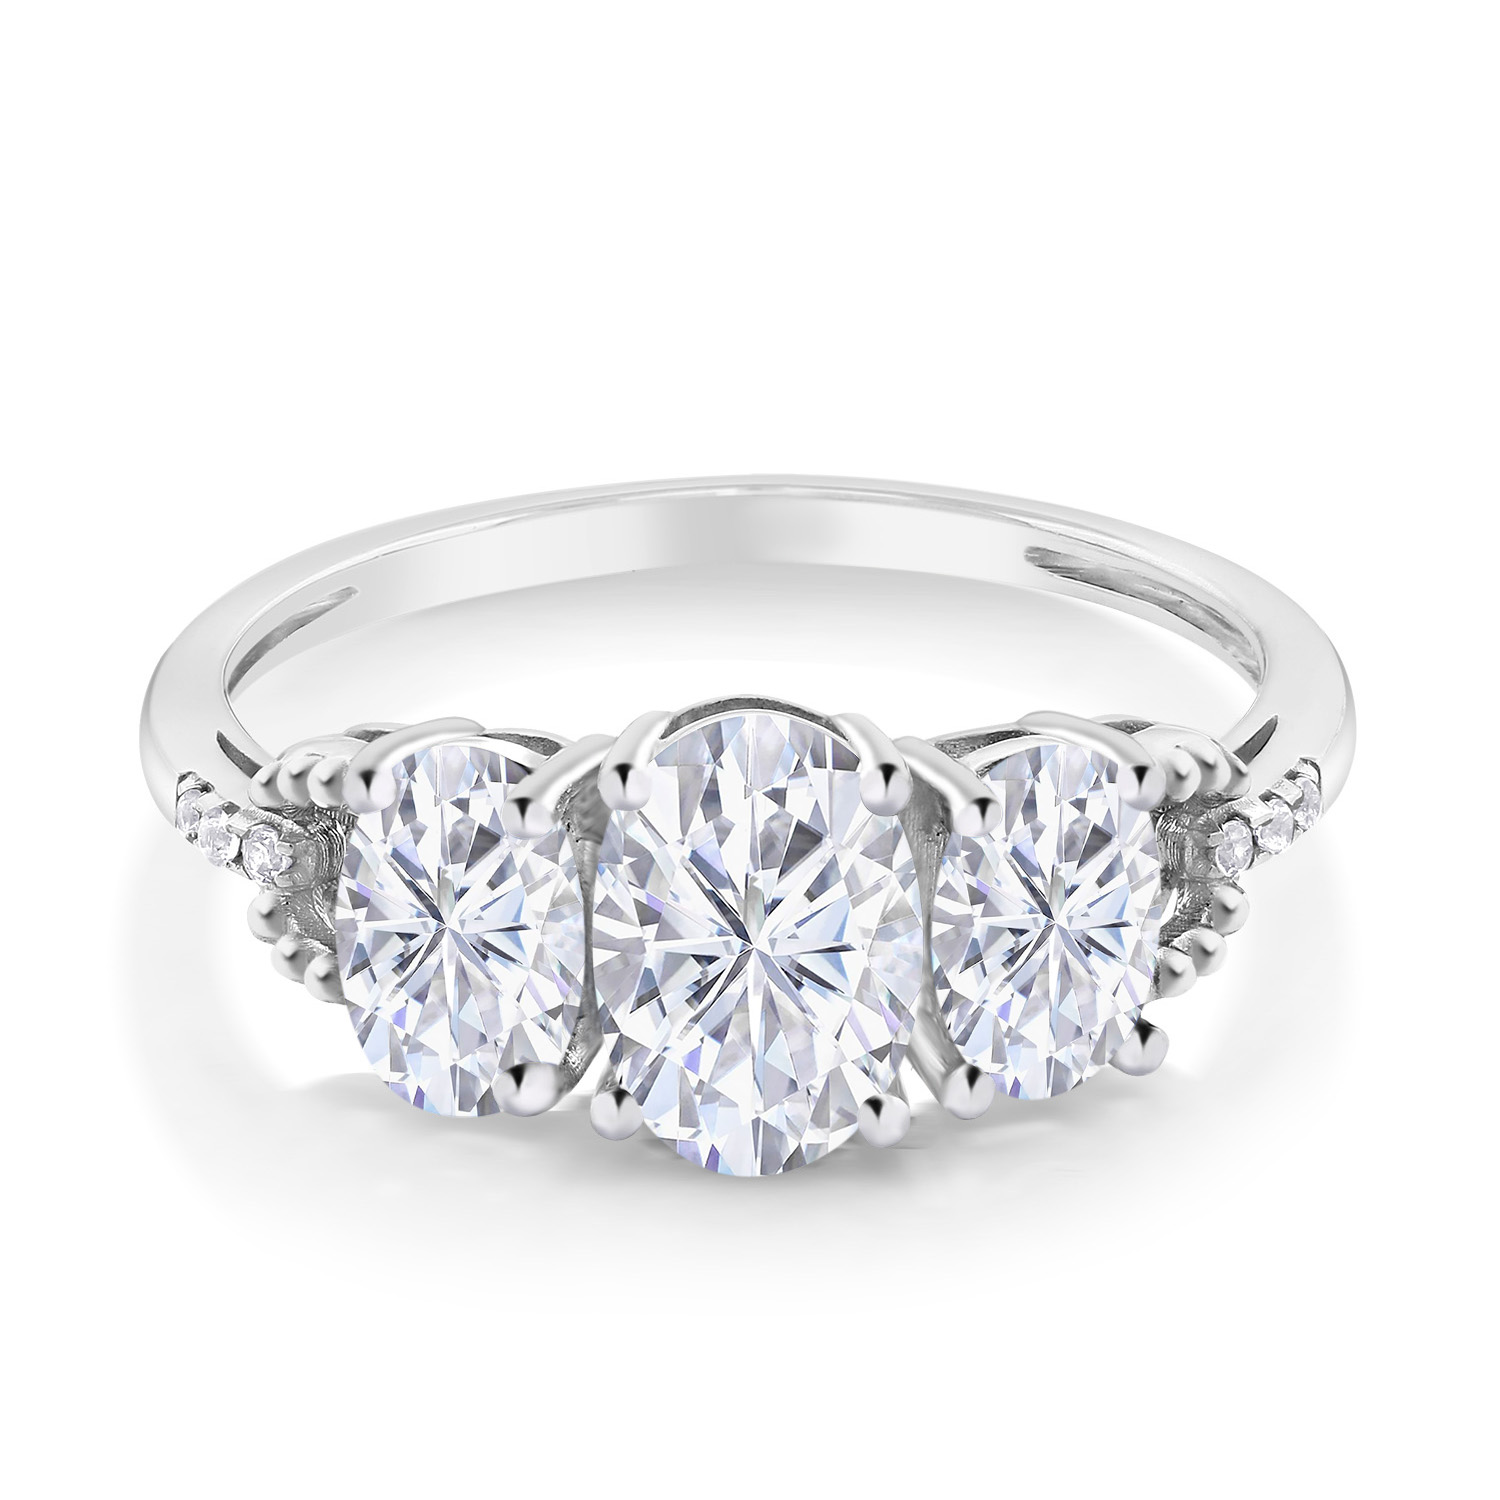 Gem Stone King 10K White Gold 3-Stone Diamond Ring Set with Oval GH Created Moissanite by Gem Stone King 1.92cttw